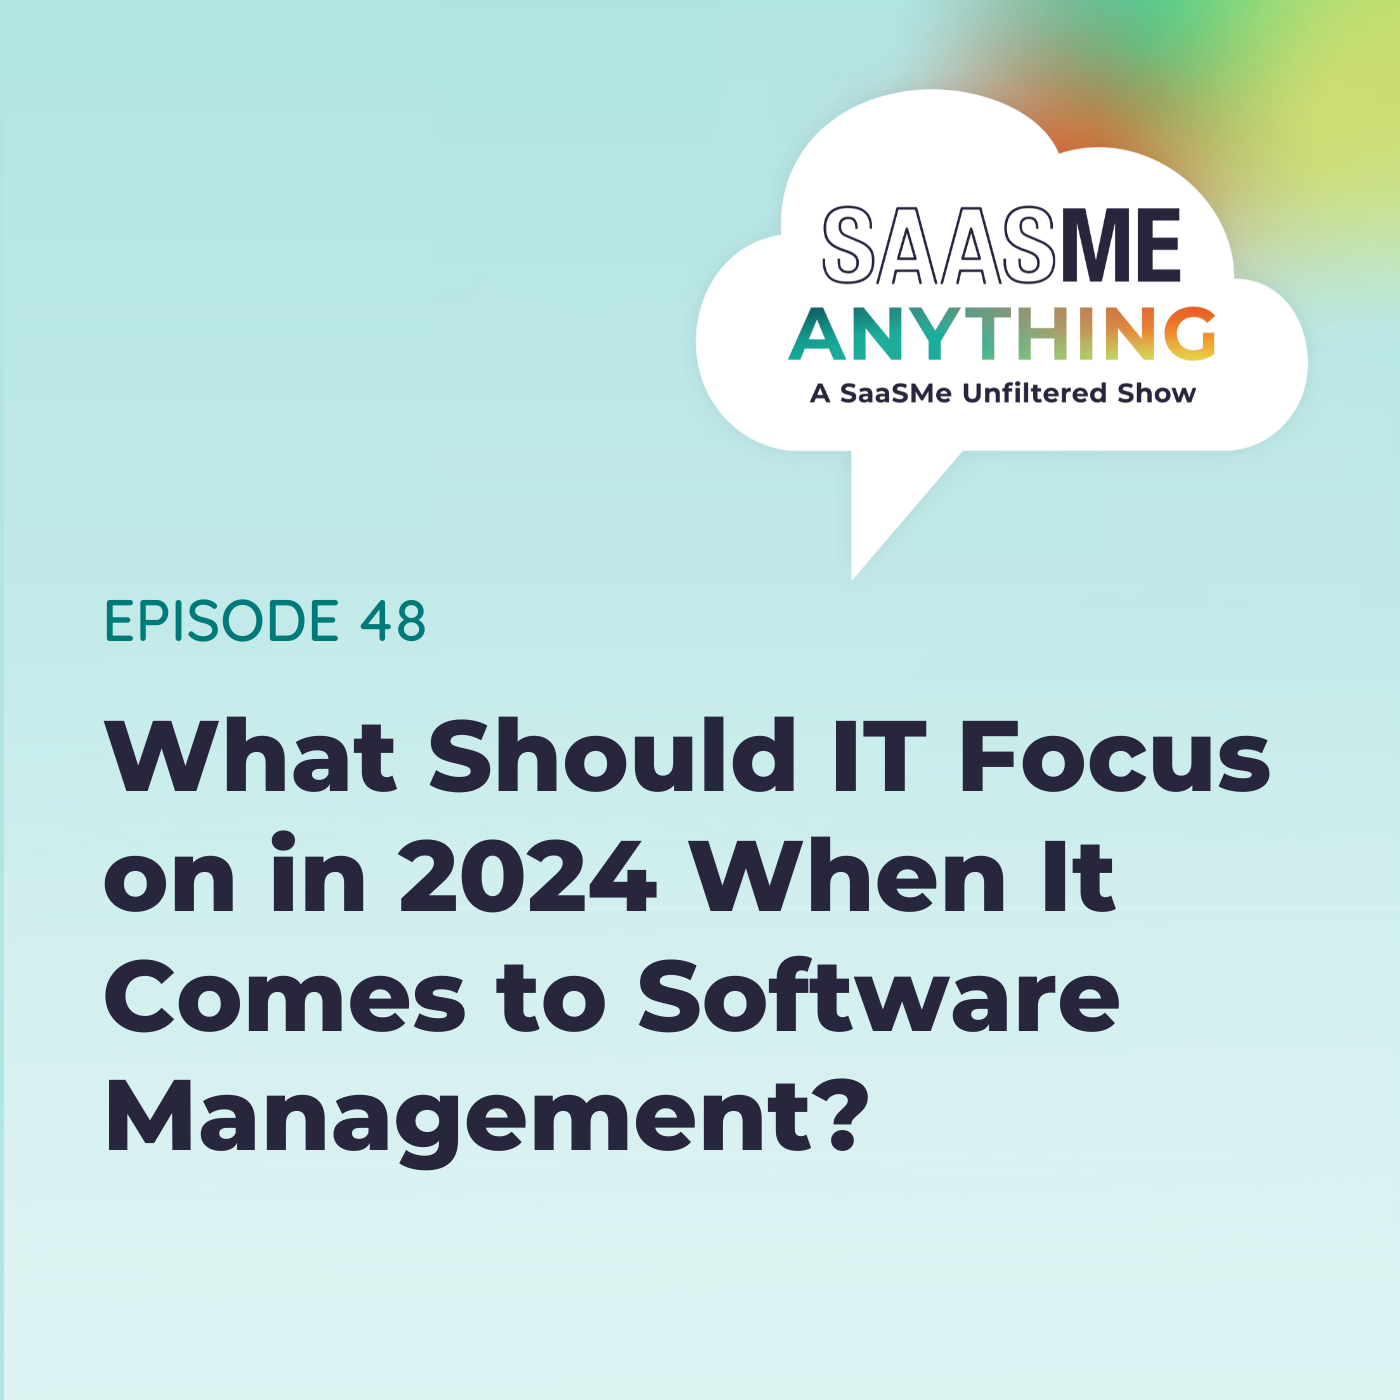 What Should IT Focus on in 2024 When It Comes to Software Management?